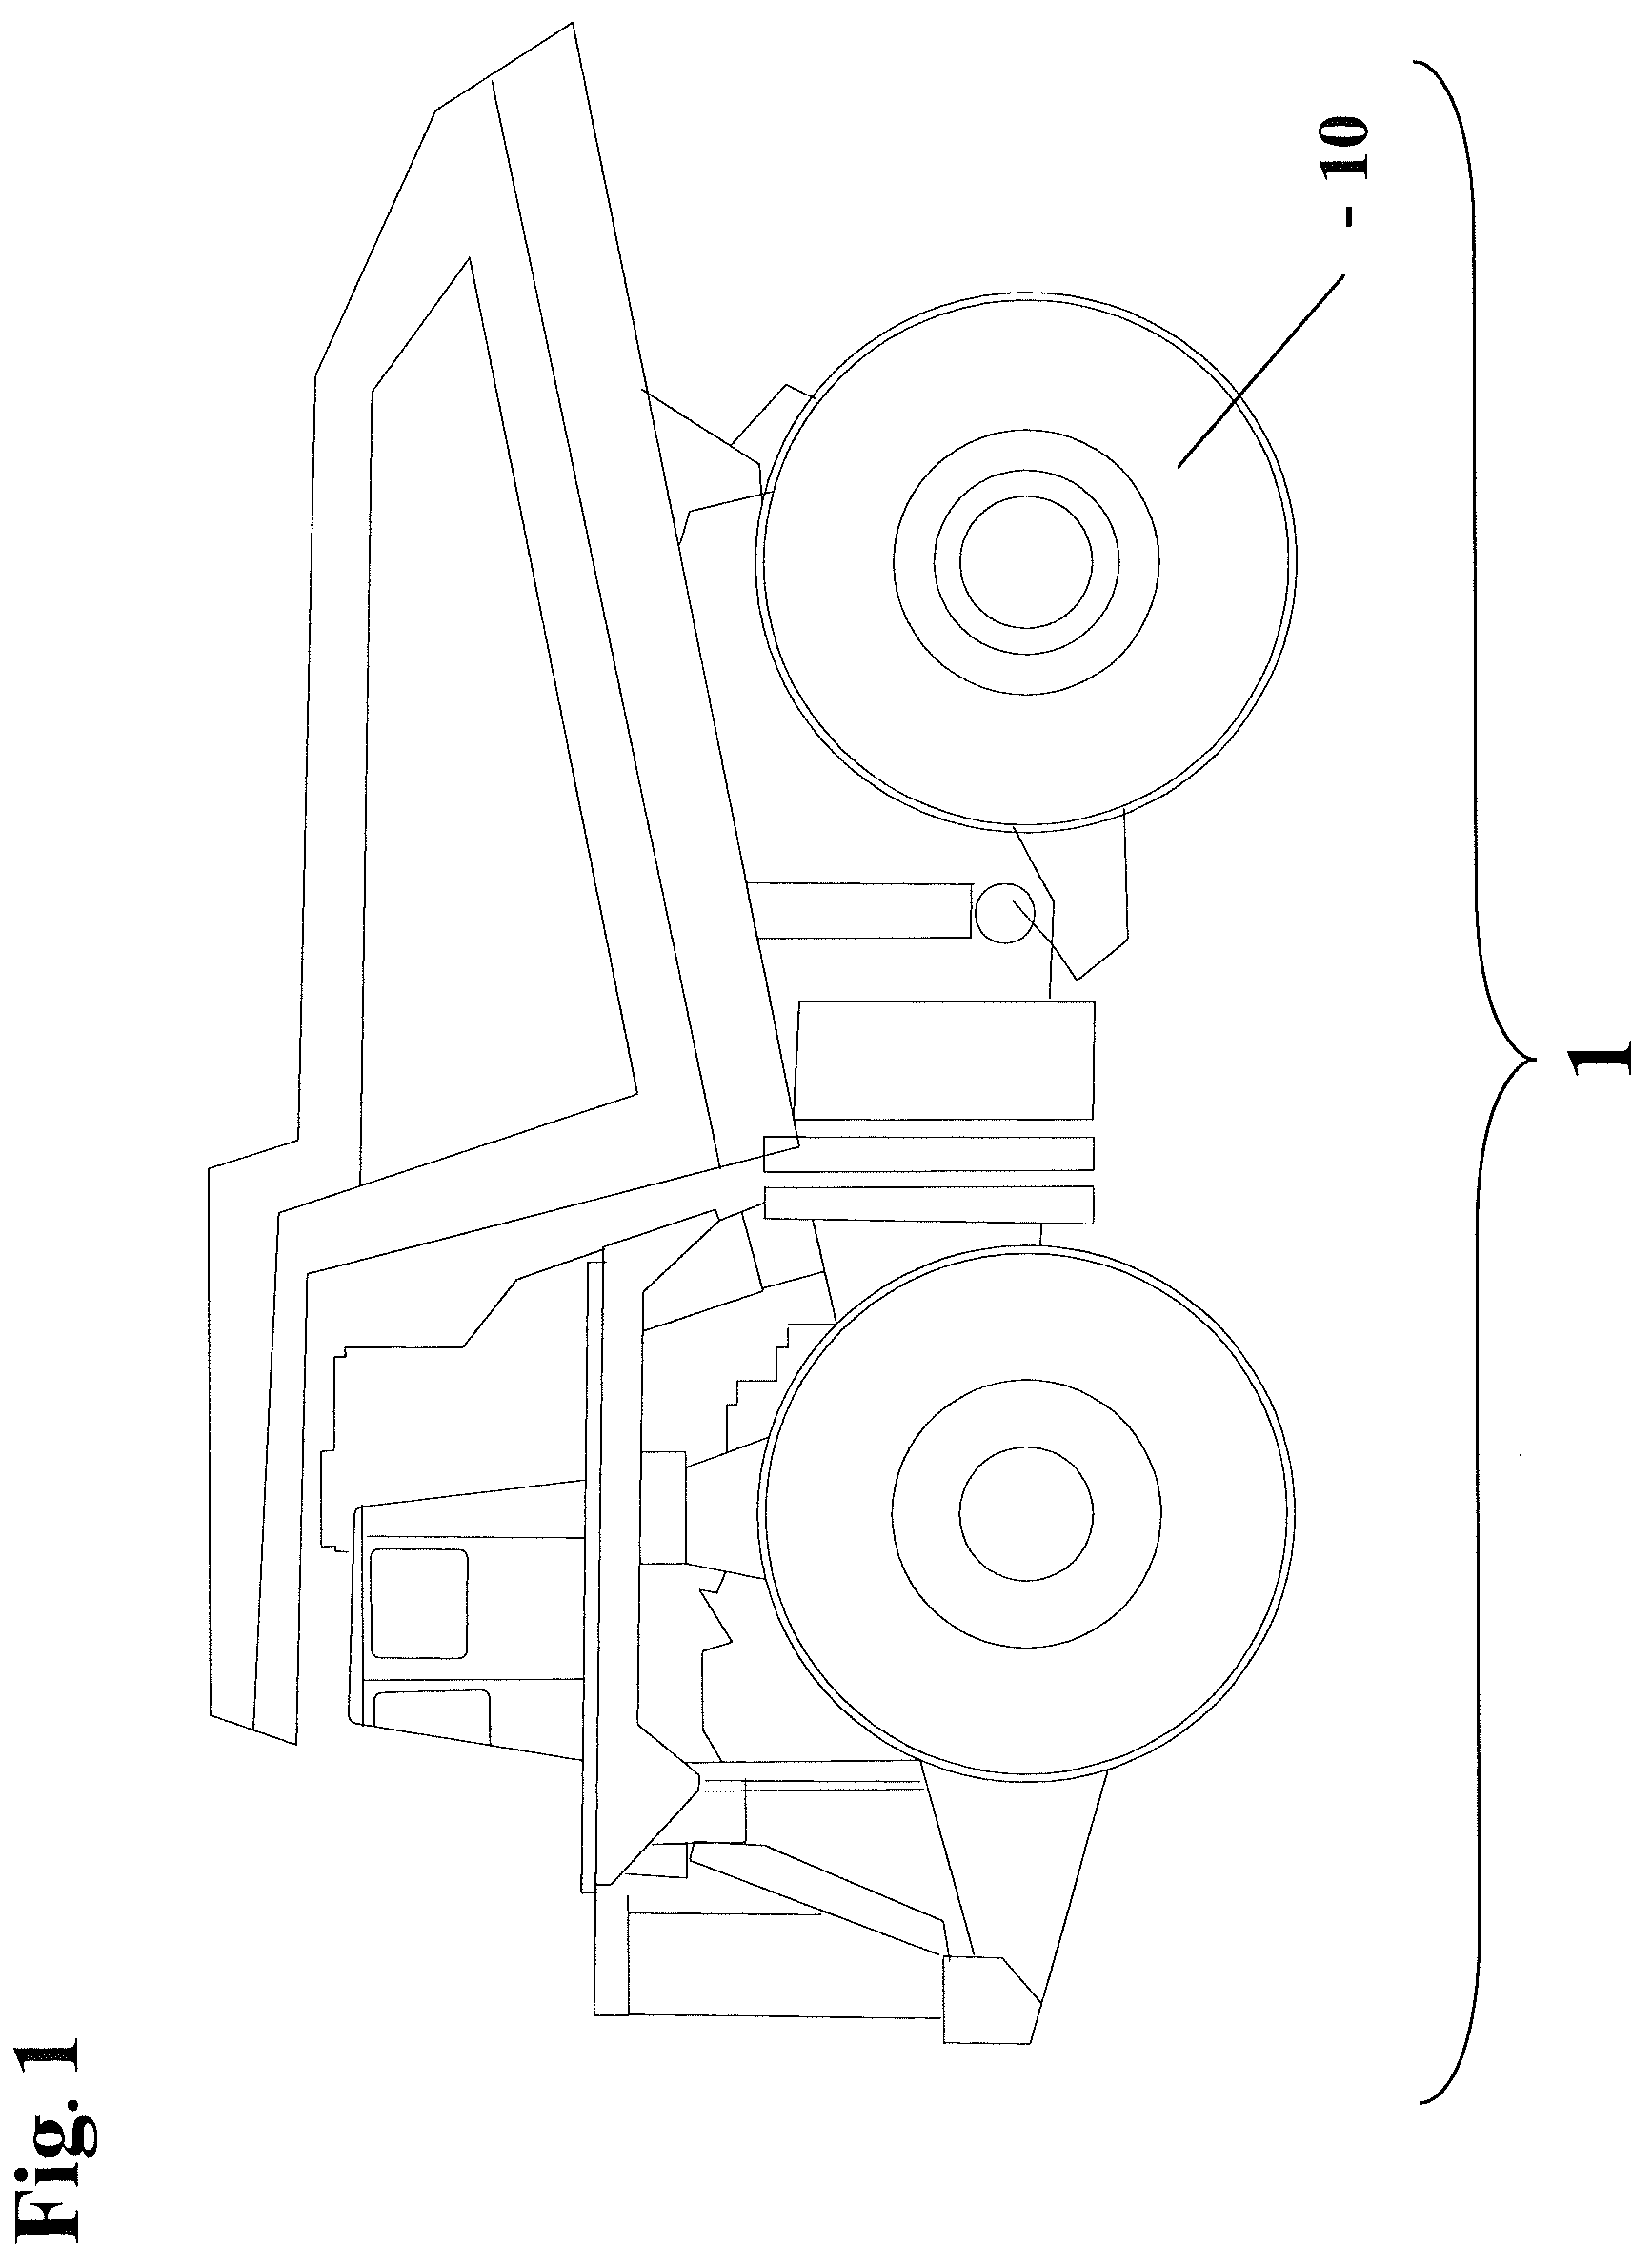 Unitized hub and rim for off-road vehicles